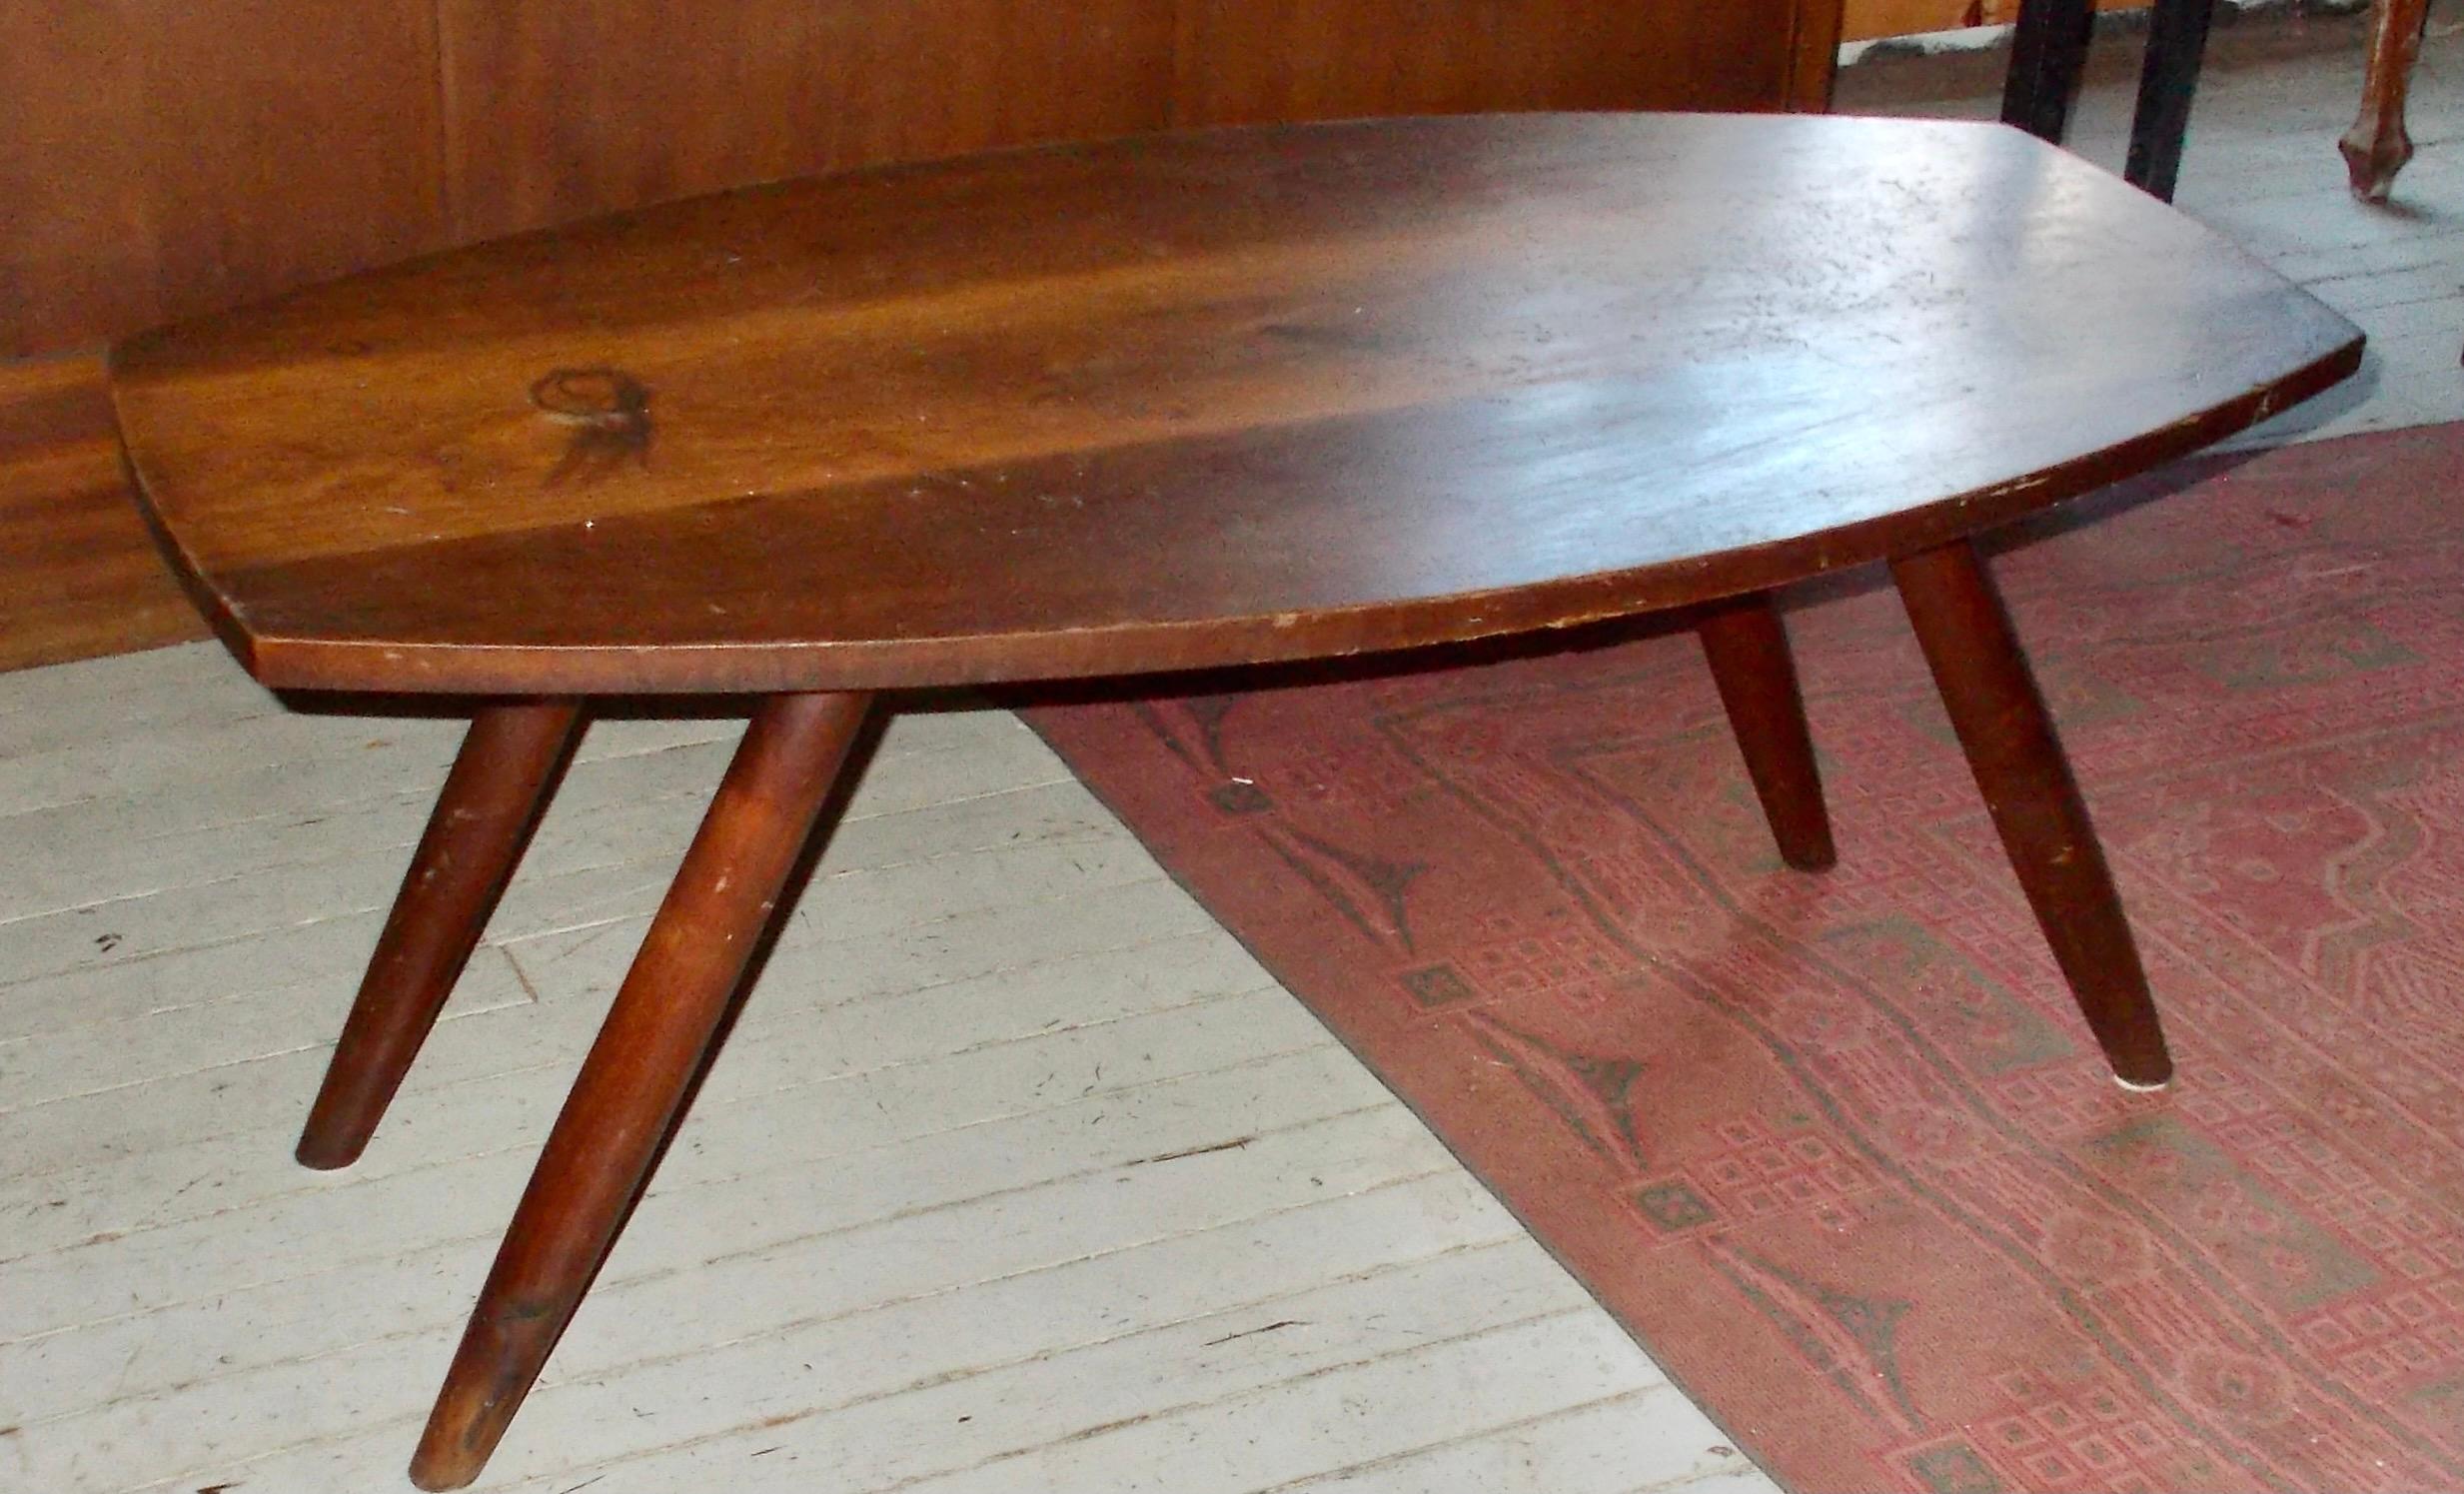 An early 'turned leg' Nakashima small low table from the late 40's/early 50's untouched, with it's original finish. Typical round section curved legs attached to the bottom very cleverly and securely. Unmarked.